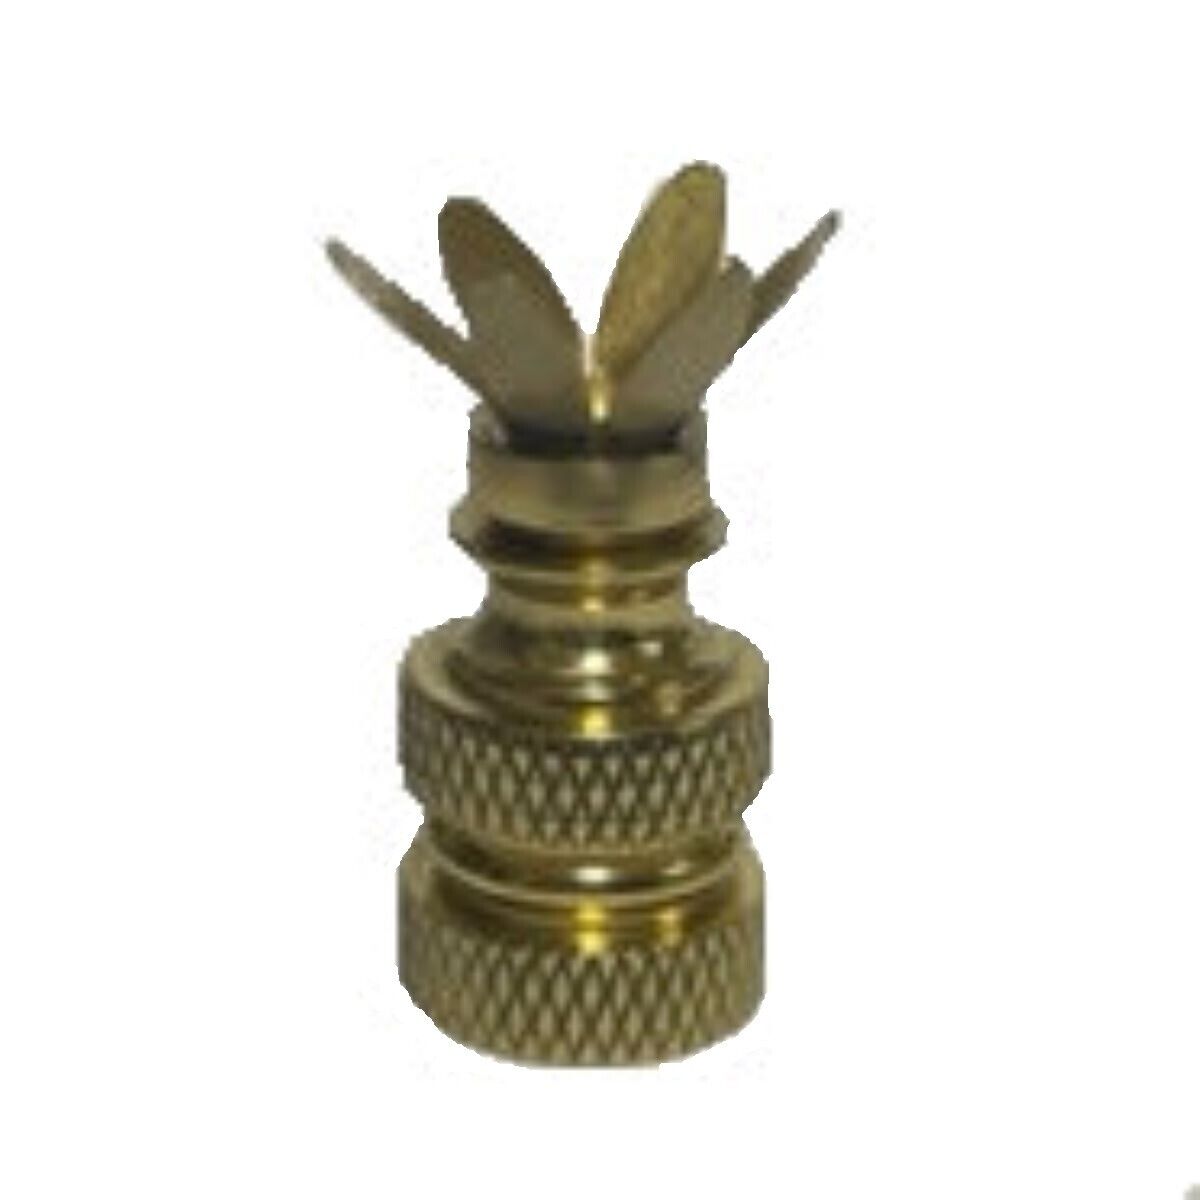 LOT OF 10...SOLID BRASS 6-PRONG DIY LAMP SHADE FINIAL BASES TV-1376